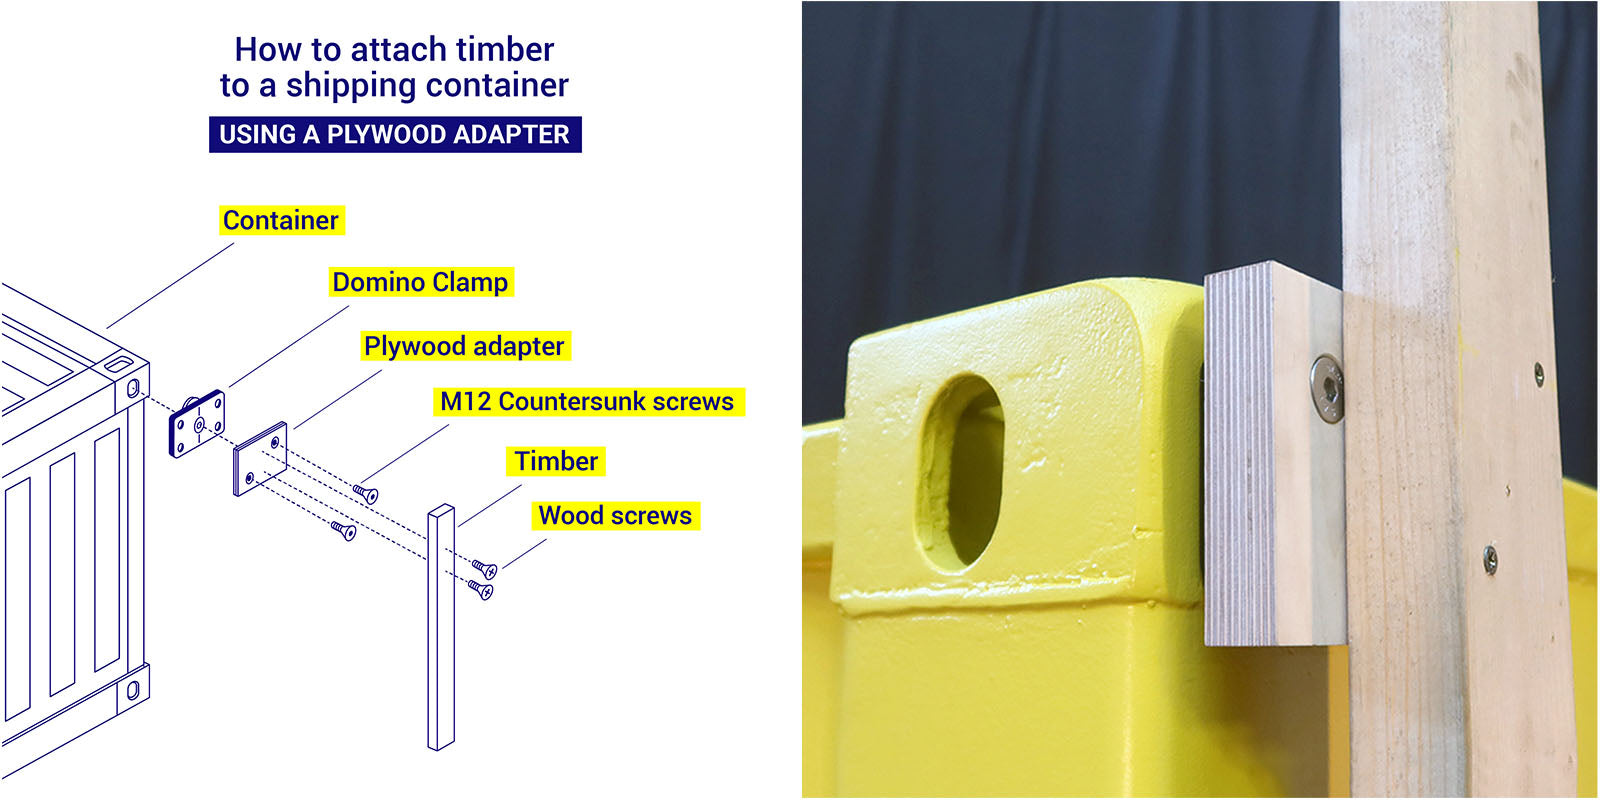 Attaching timber using a plywood adapter